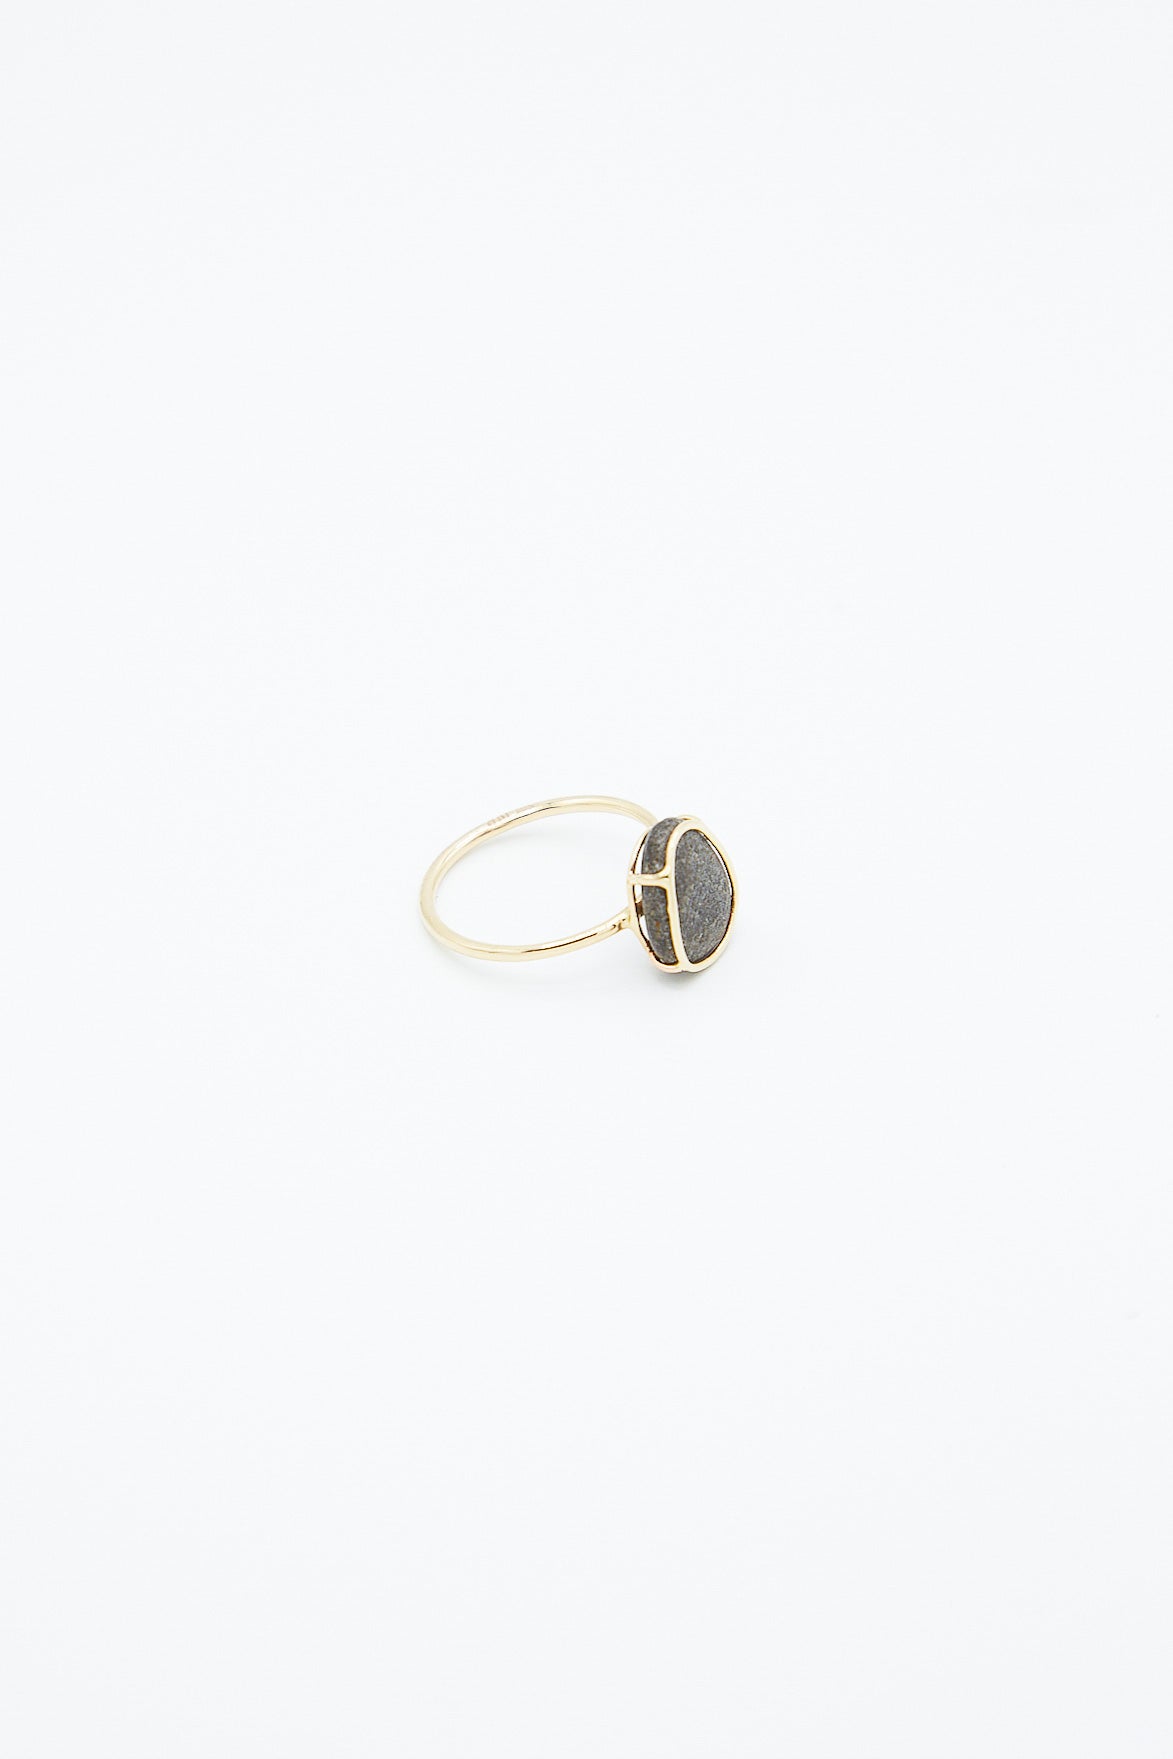 A Mary MacGill 14k Floating Ring in Island Stone, handmade with a black stone, featuring a unique Block Island stone. Side view.